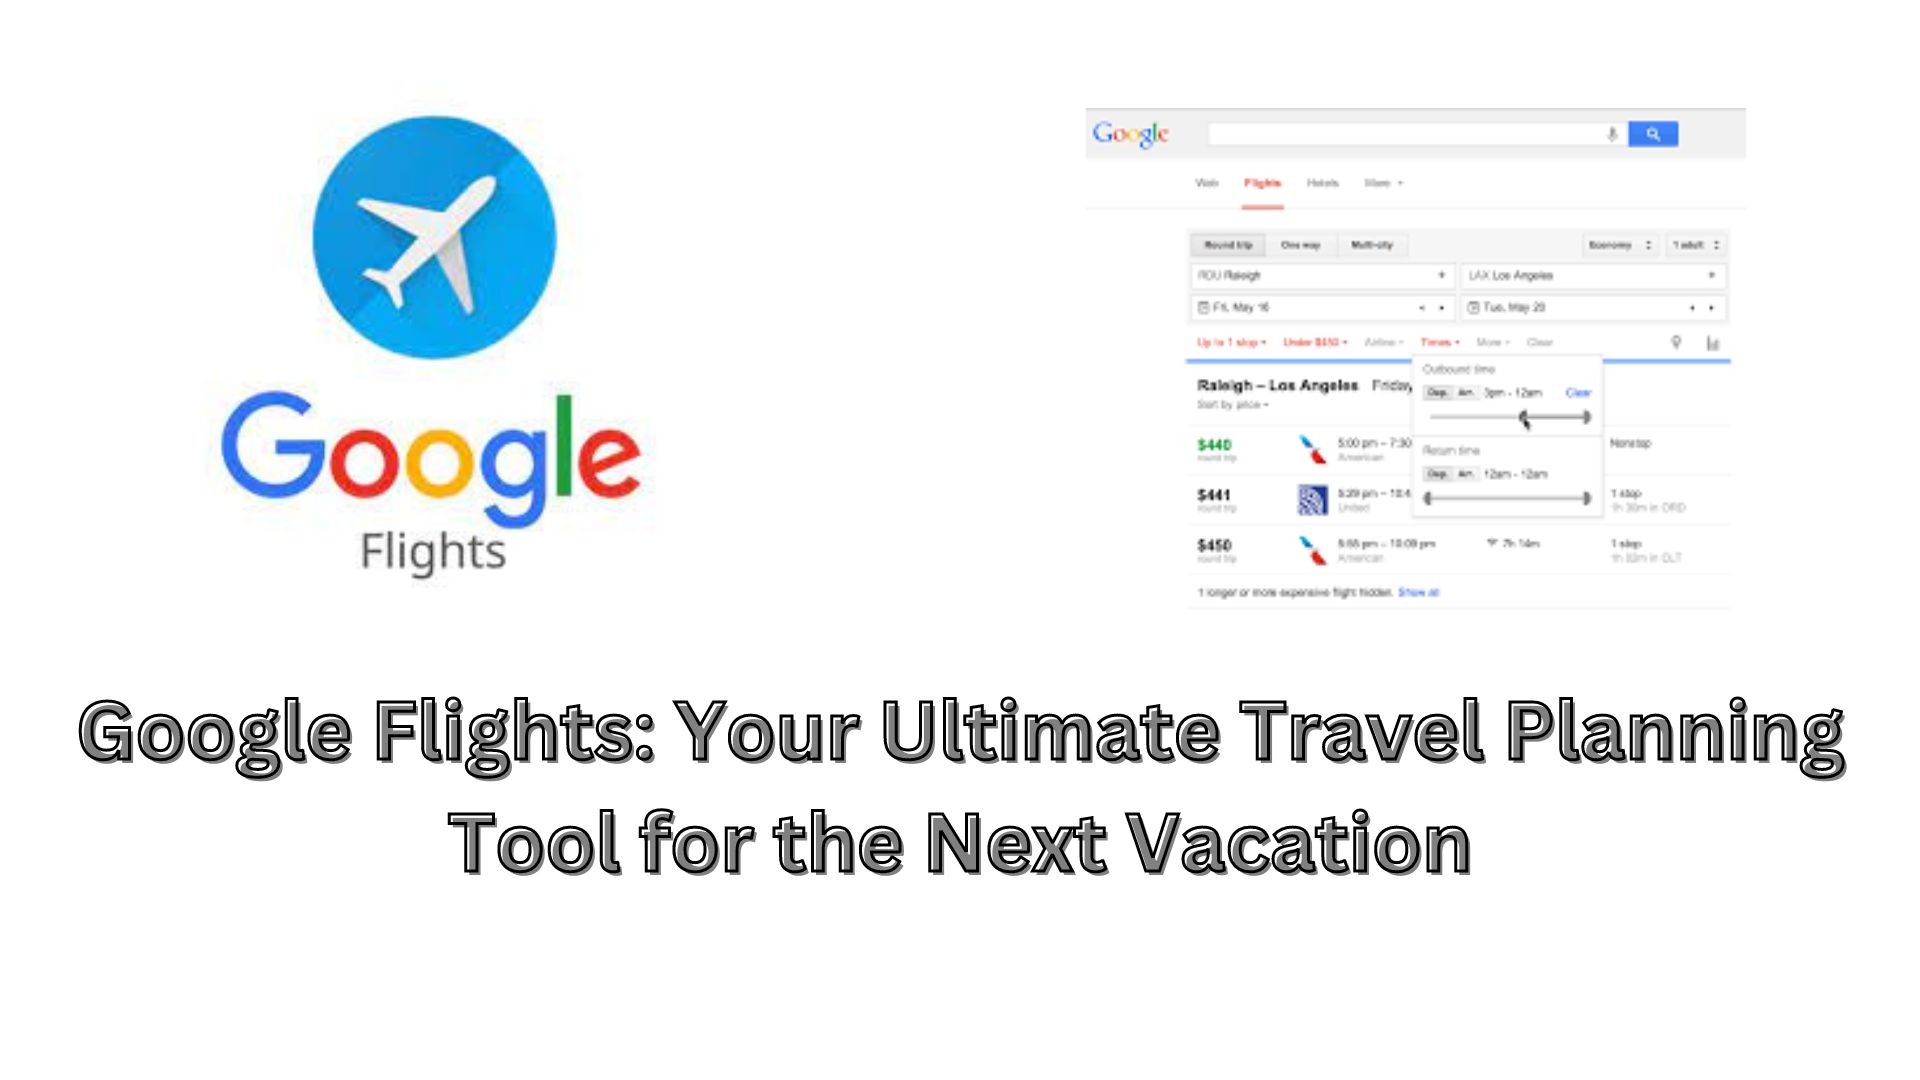 Google Flights: Your Ultimate Travel Planning Tool for the Next Vacation